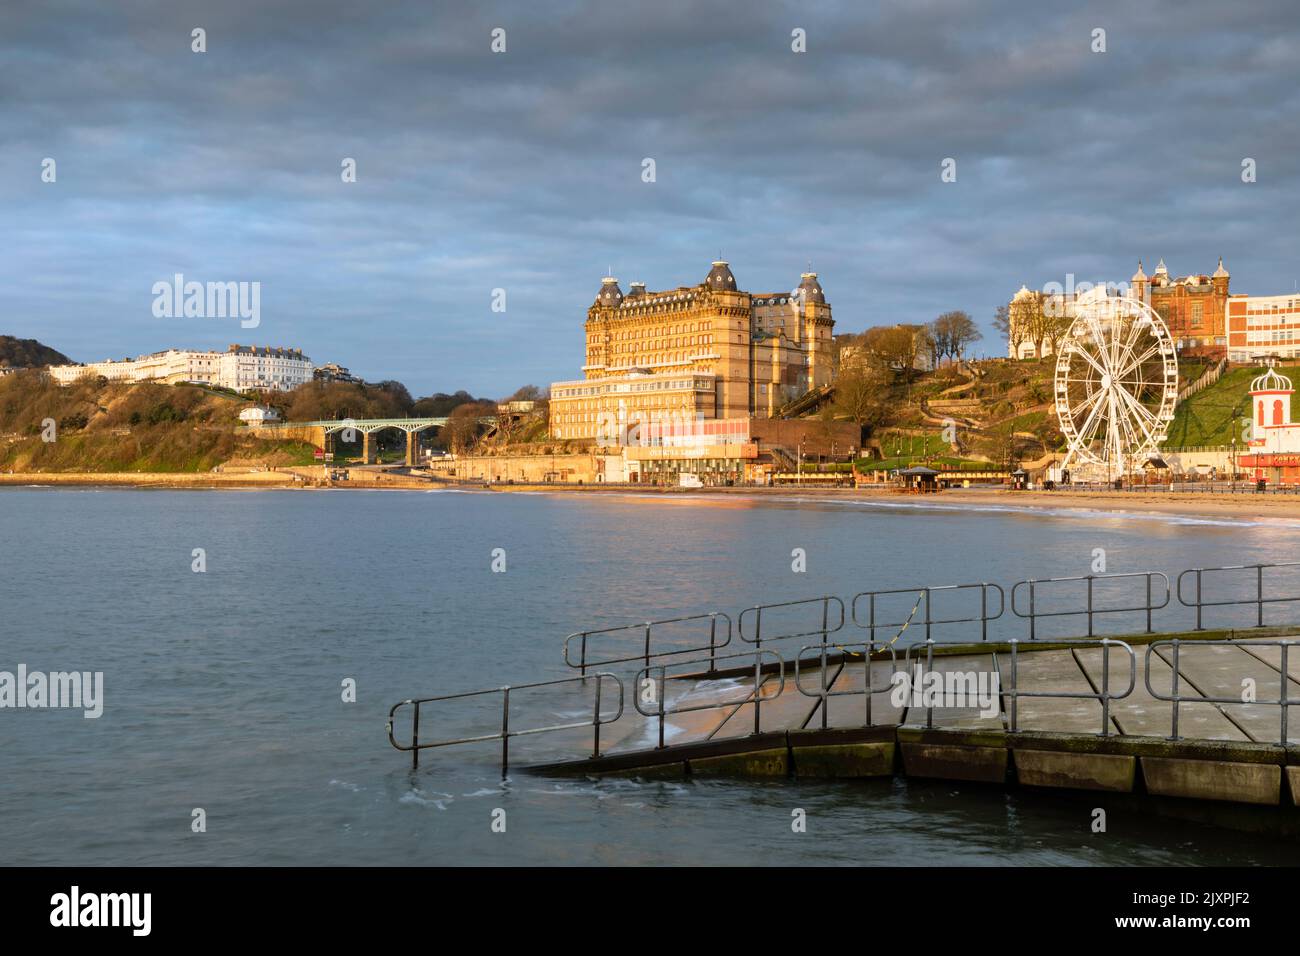 The seafront at Scarborough with the lifeboat stations slipway in the foreground. Stock Photo